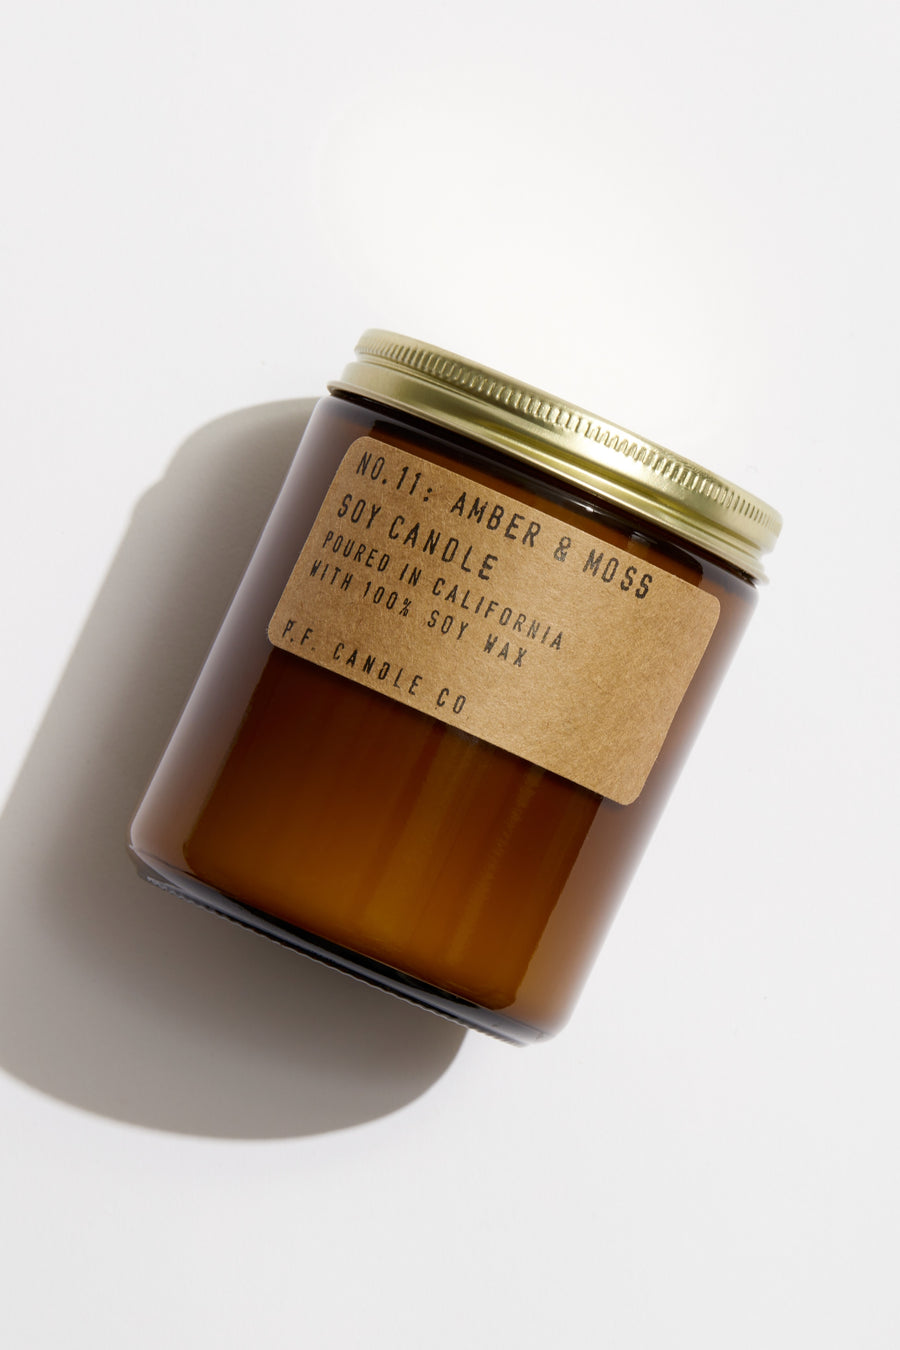 P.F. Candle Co. Standard Soy Candle - Amber & Moss